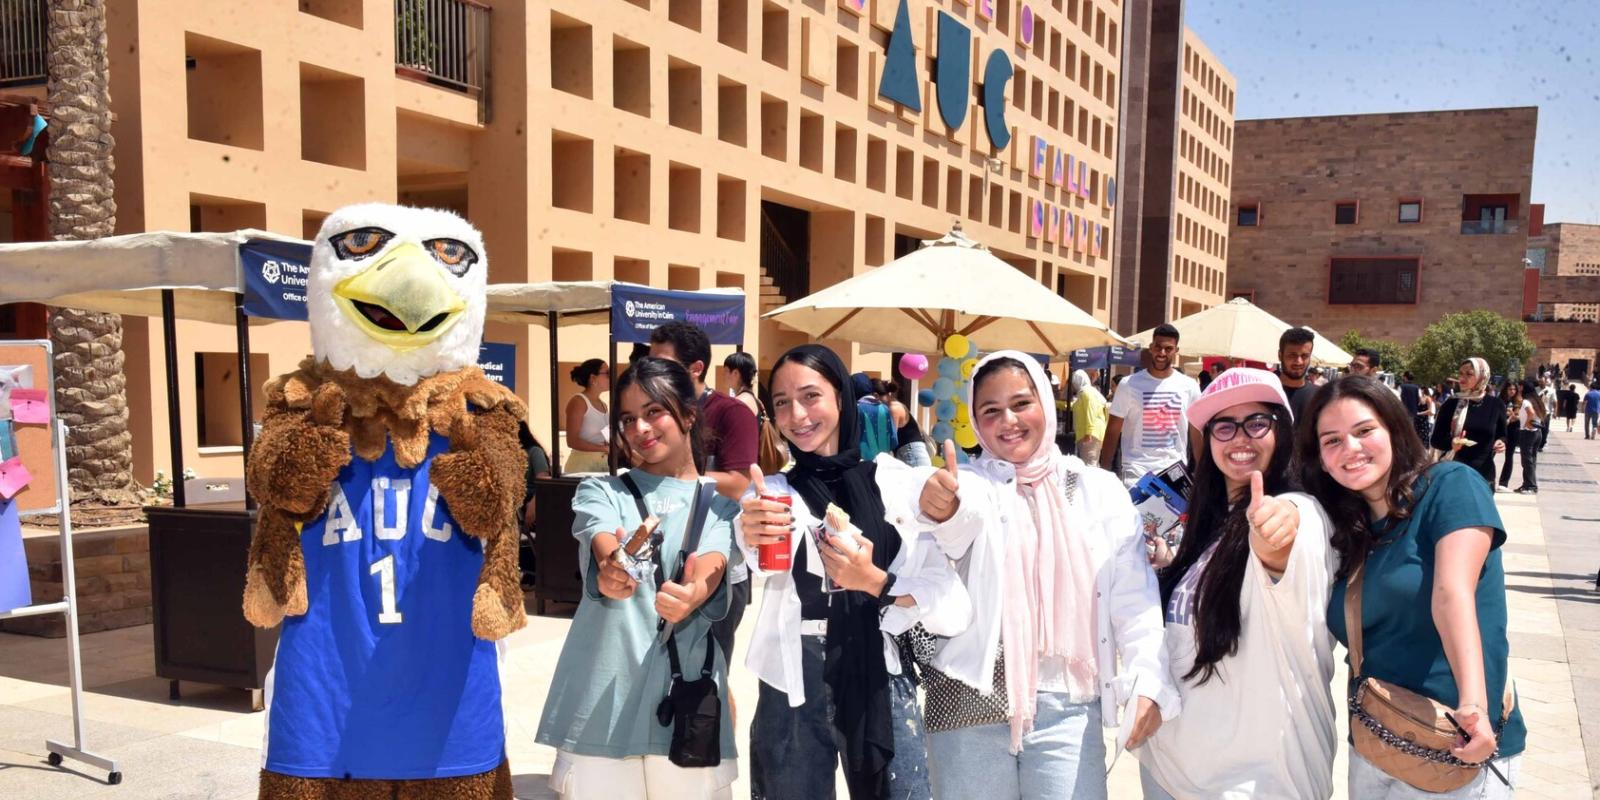 Group of girls standing with an eagle mascot